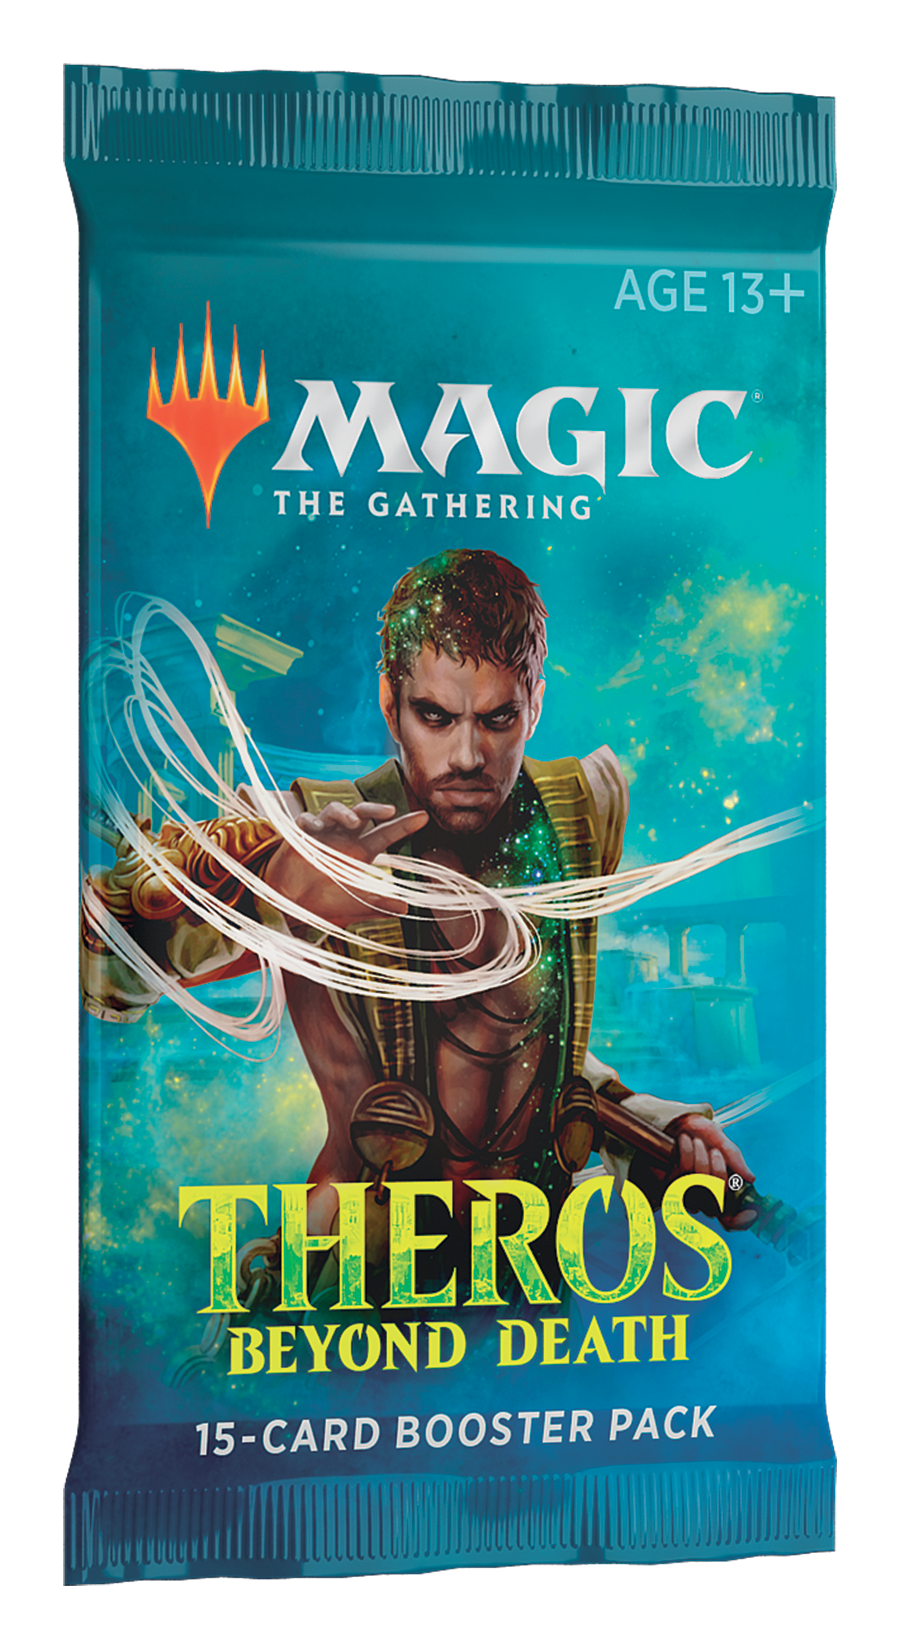 Magic the Gathering: Theros Beyond Death Booster Pack